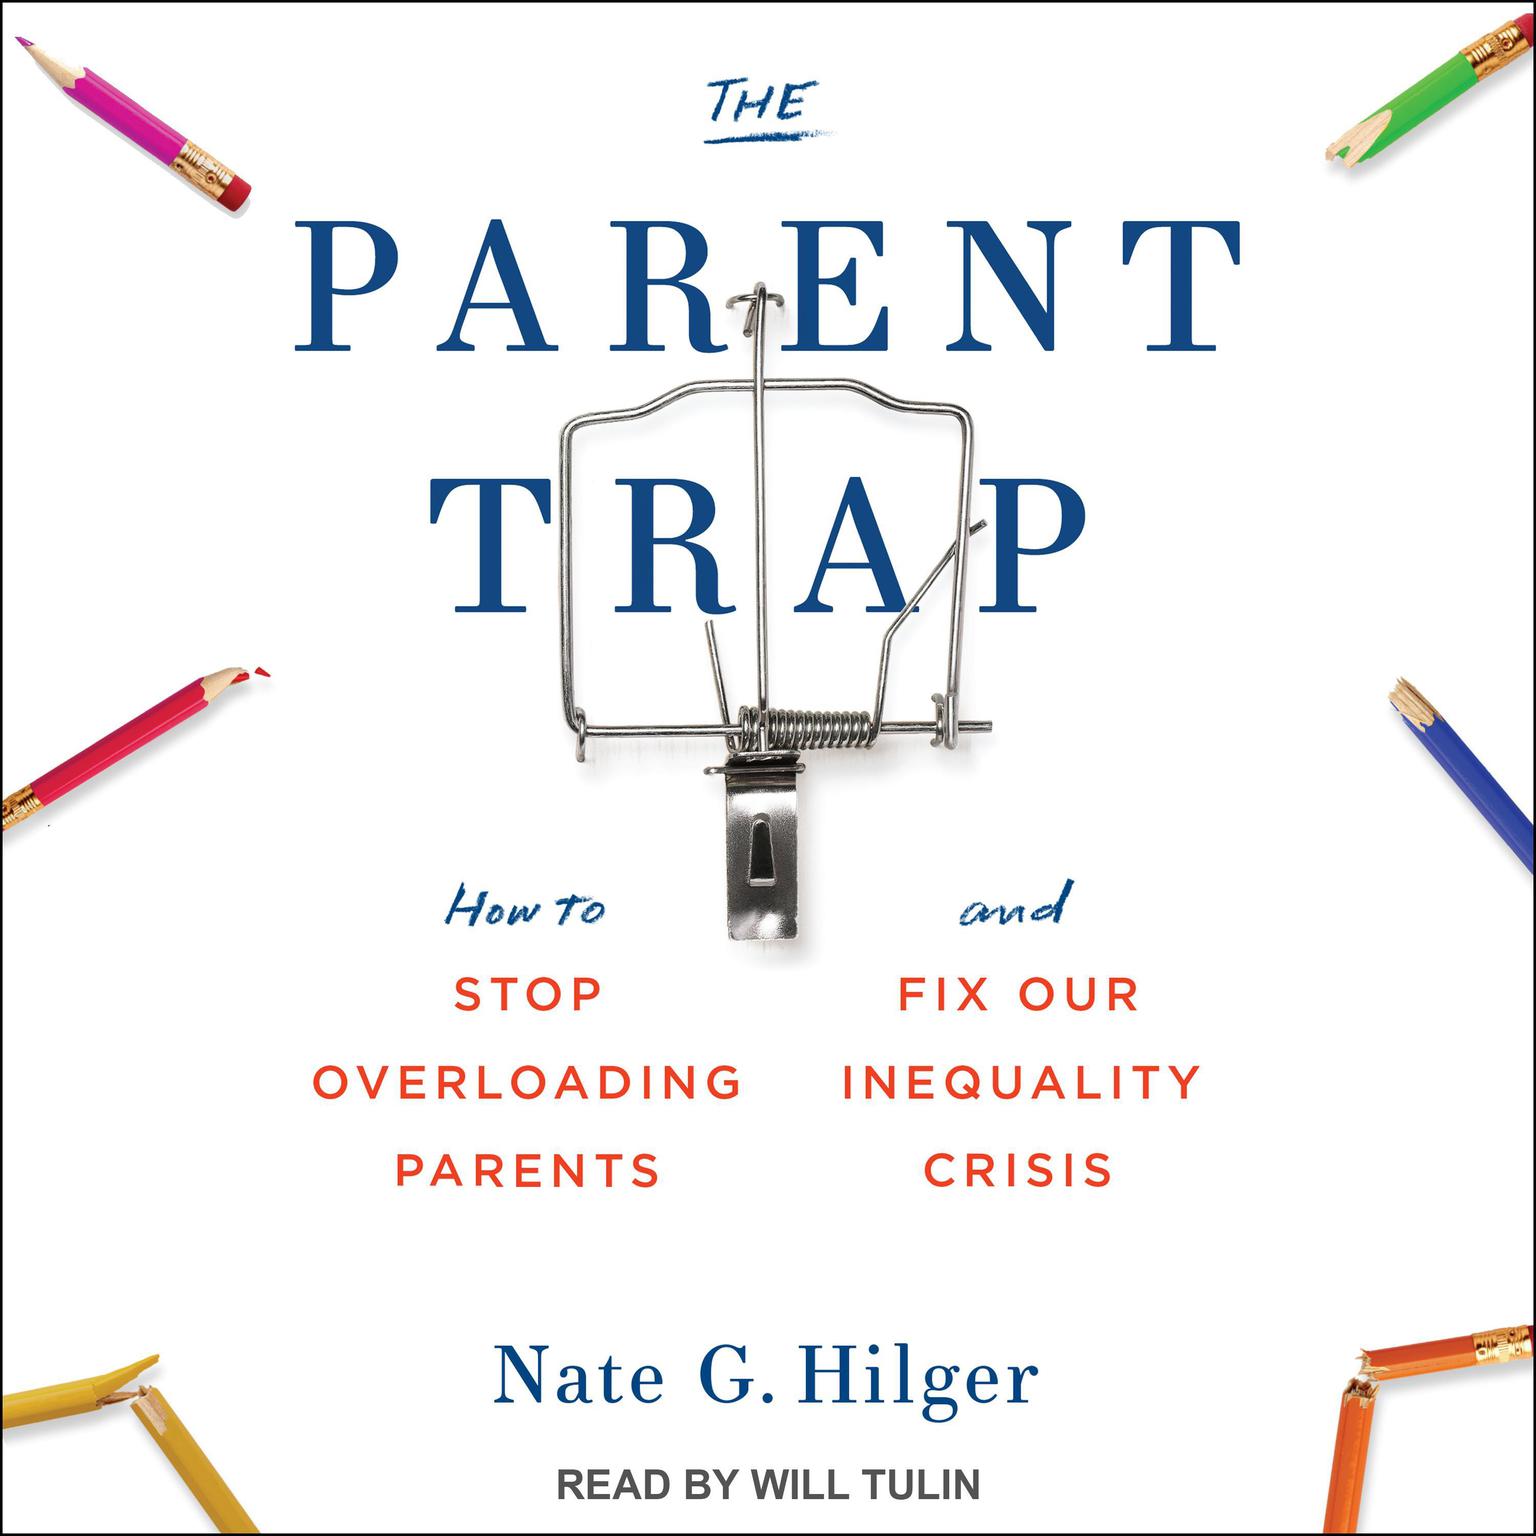 The Parent Trap: How to Stop Overloading Parents and Fix Our Inequality Crisis Audiobook, by Nate G. Hilger